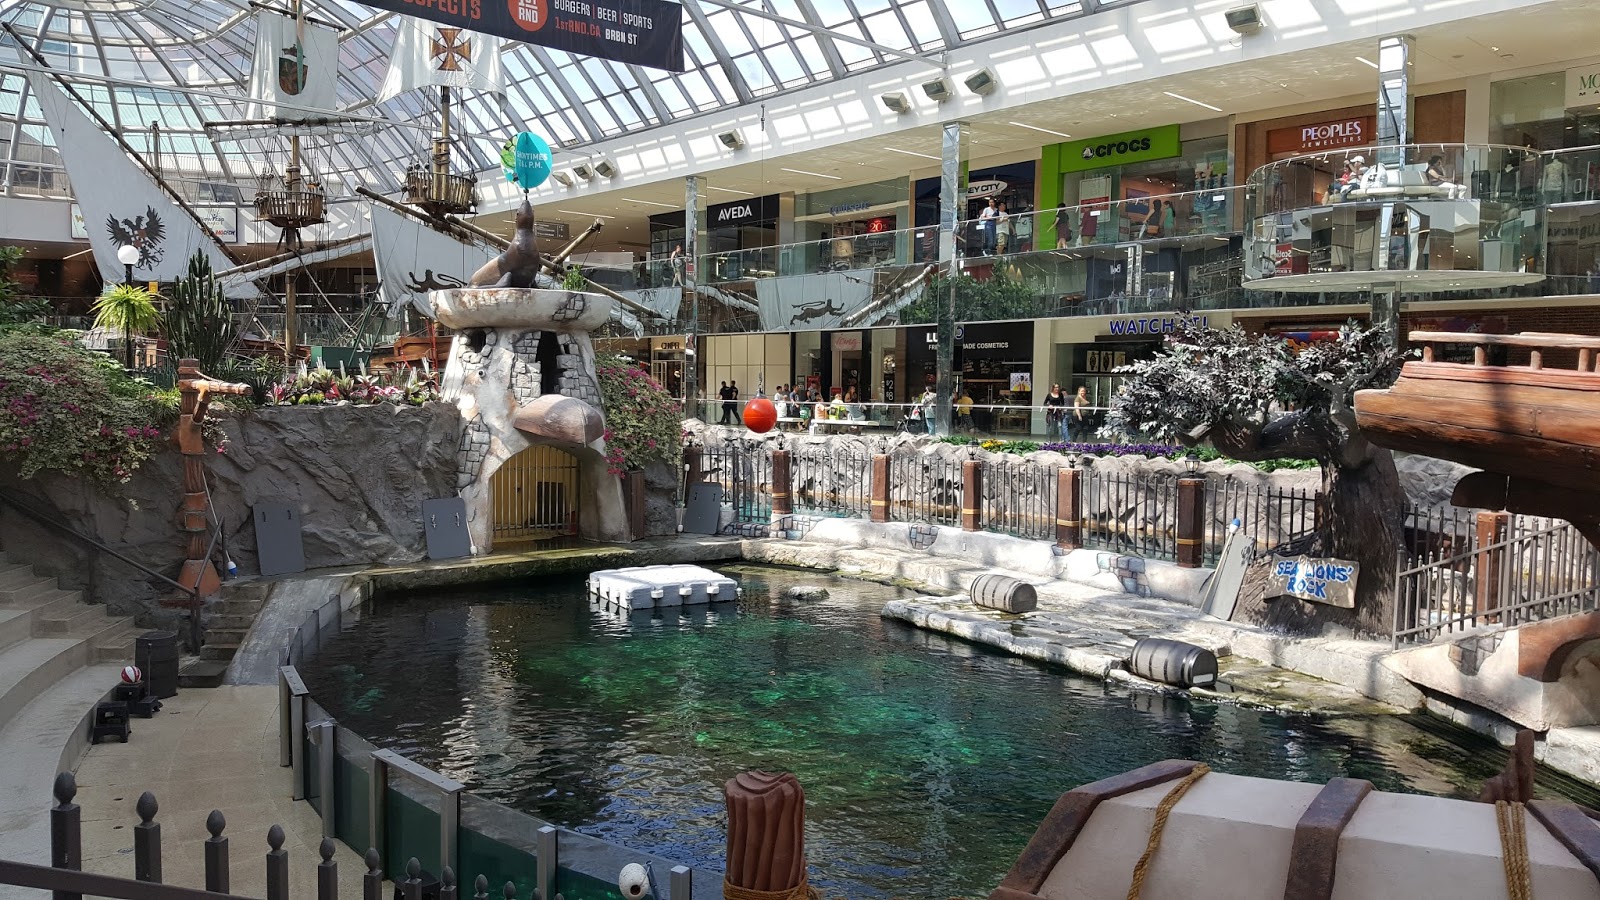 Blogging Strikes Me As Narcissistic But Having A Ball At West Edmonton Mall